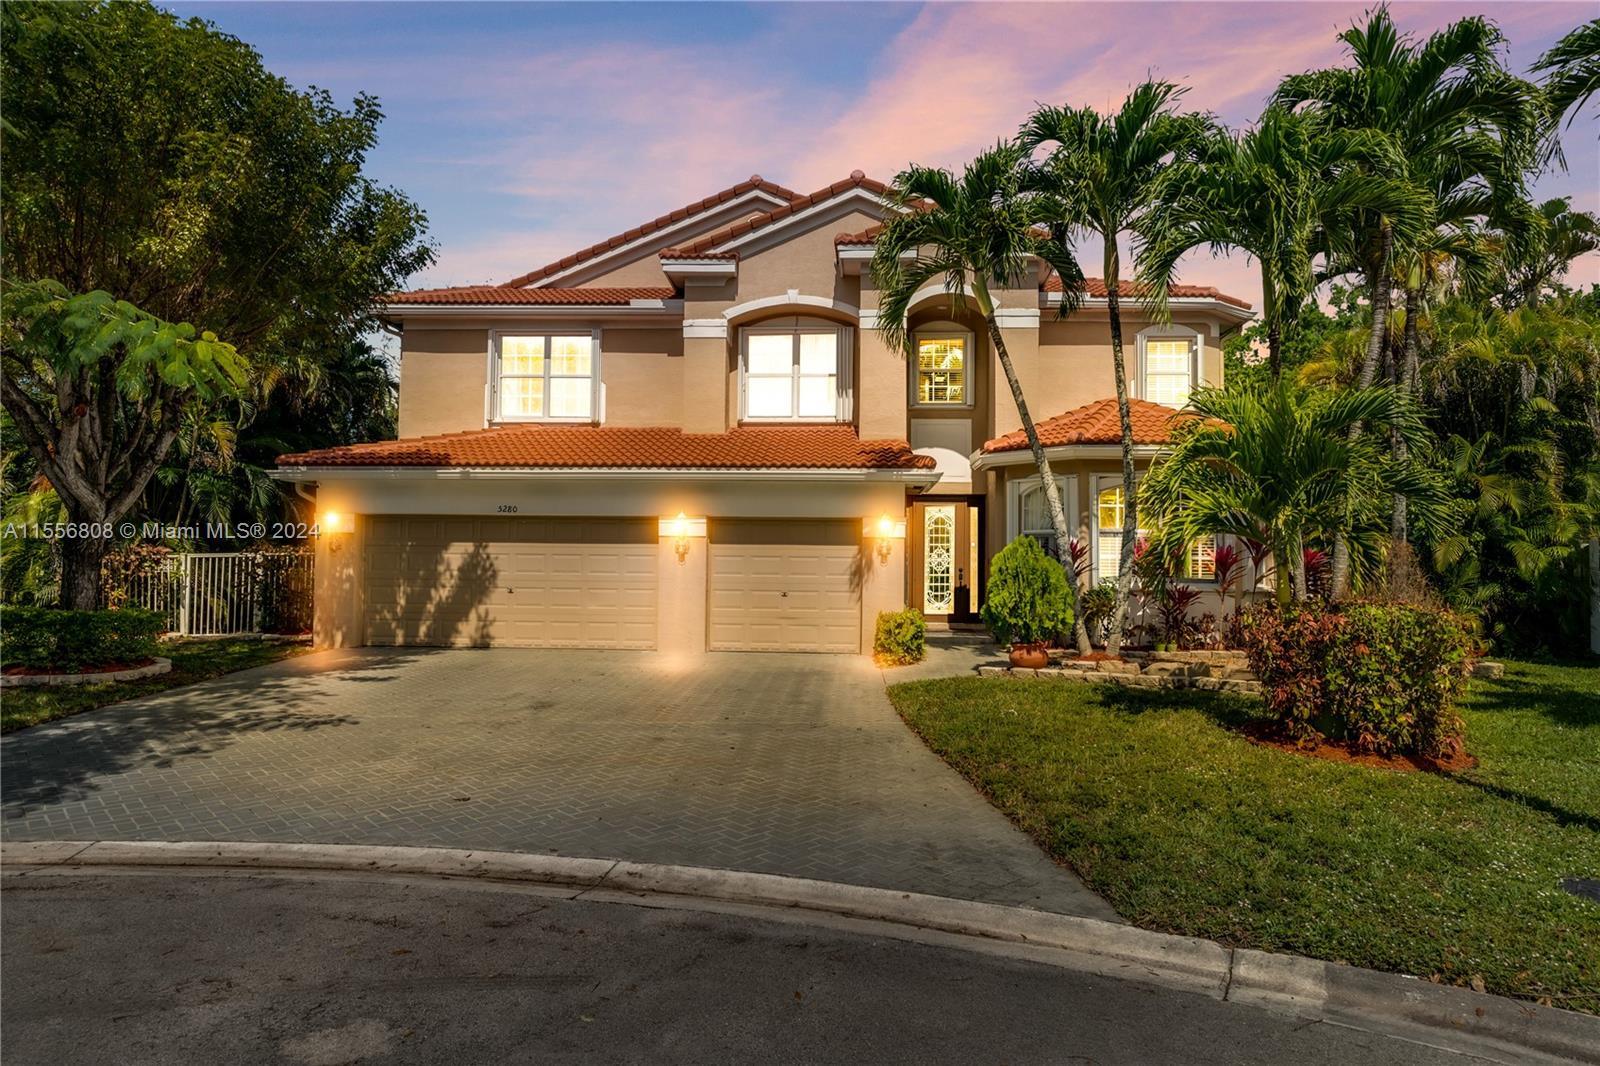 Photo of 5280 NW 95th Ave in Coral Springs, FL